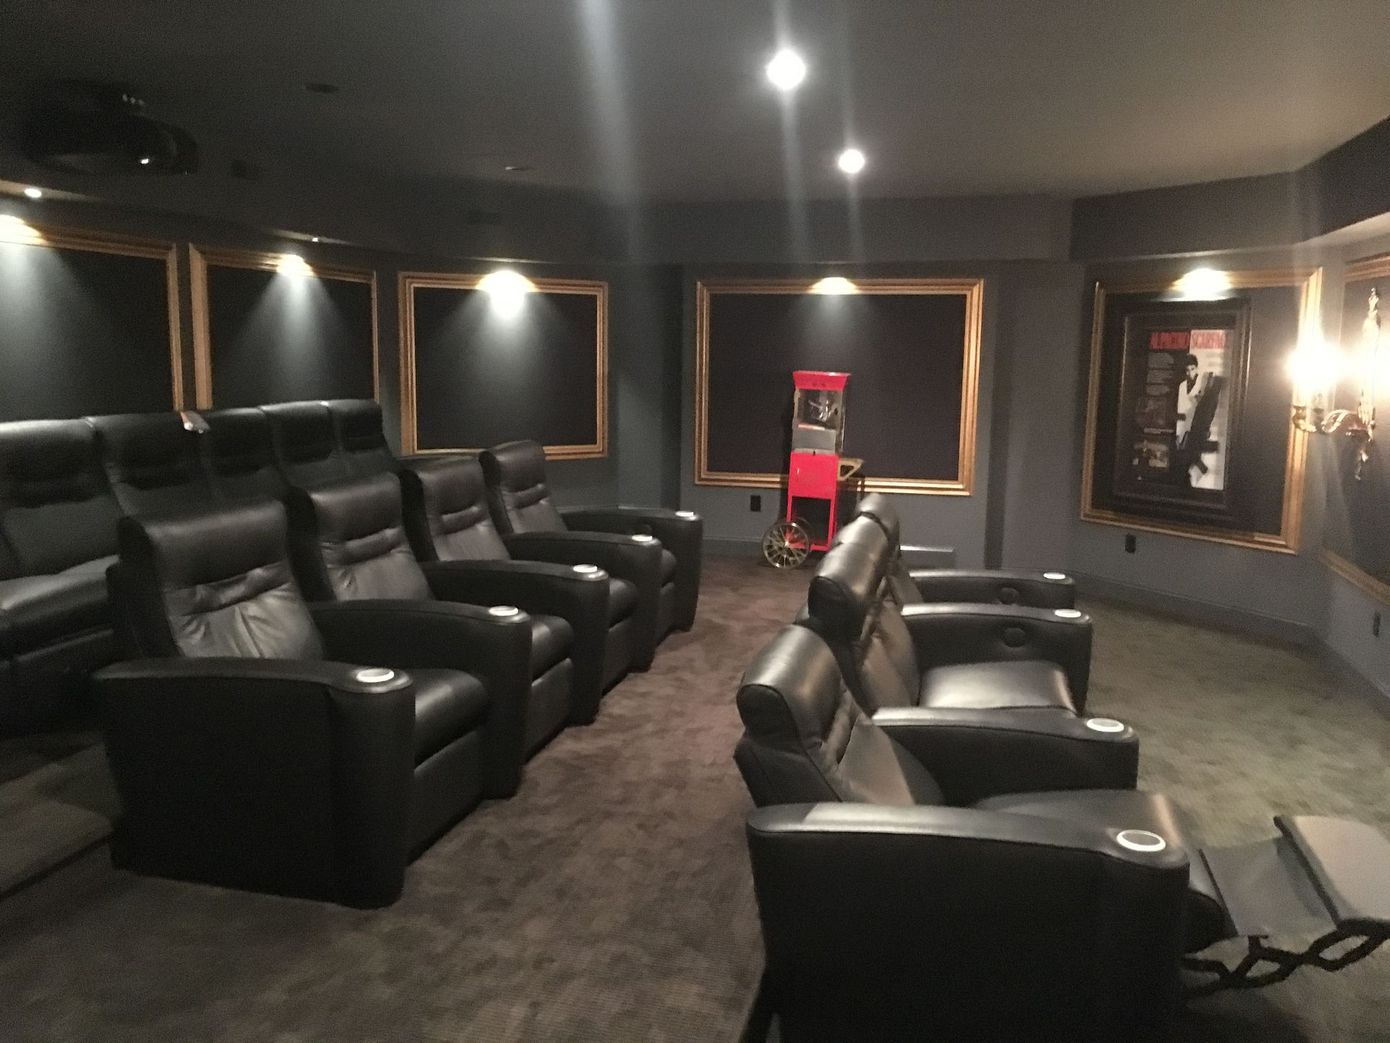 A row of black leather chairs in a home theater